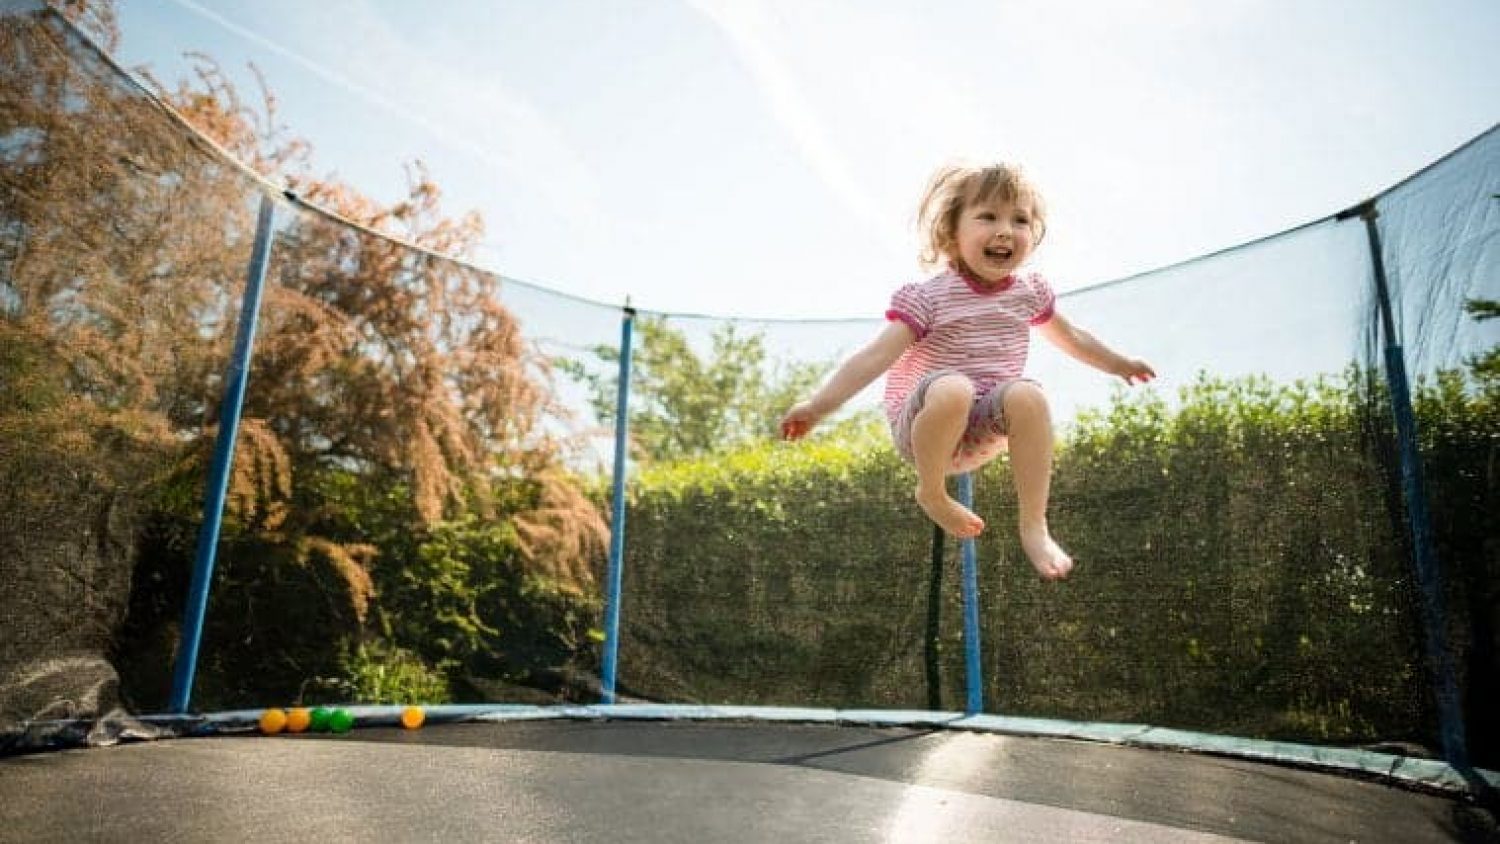 Spring free Trampoline vs Regular Trampolines: All You Need to Know!